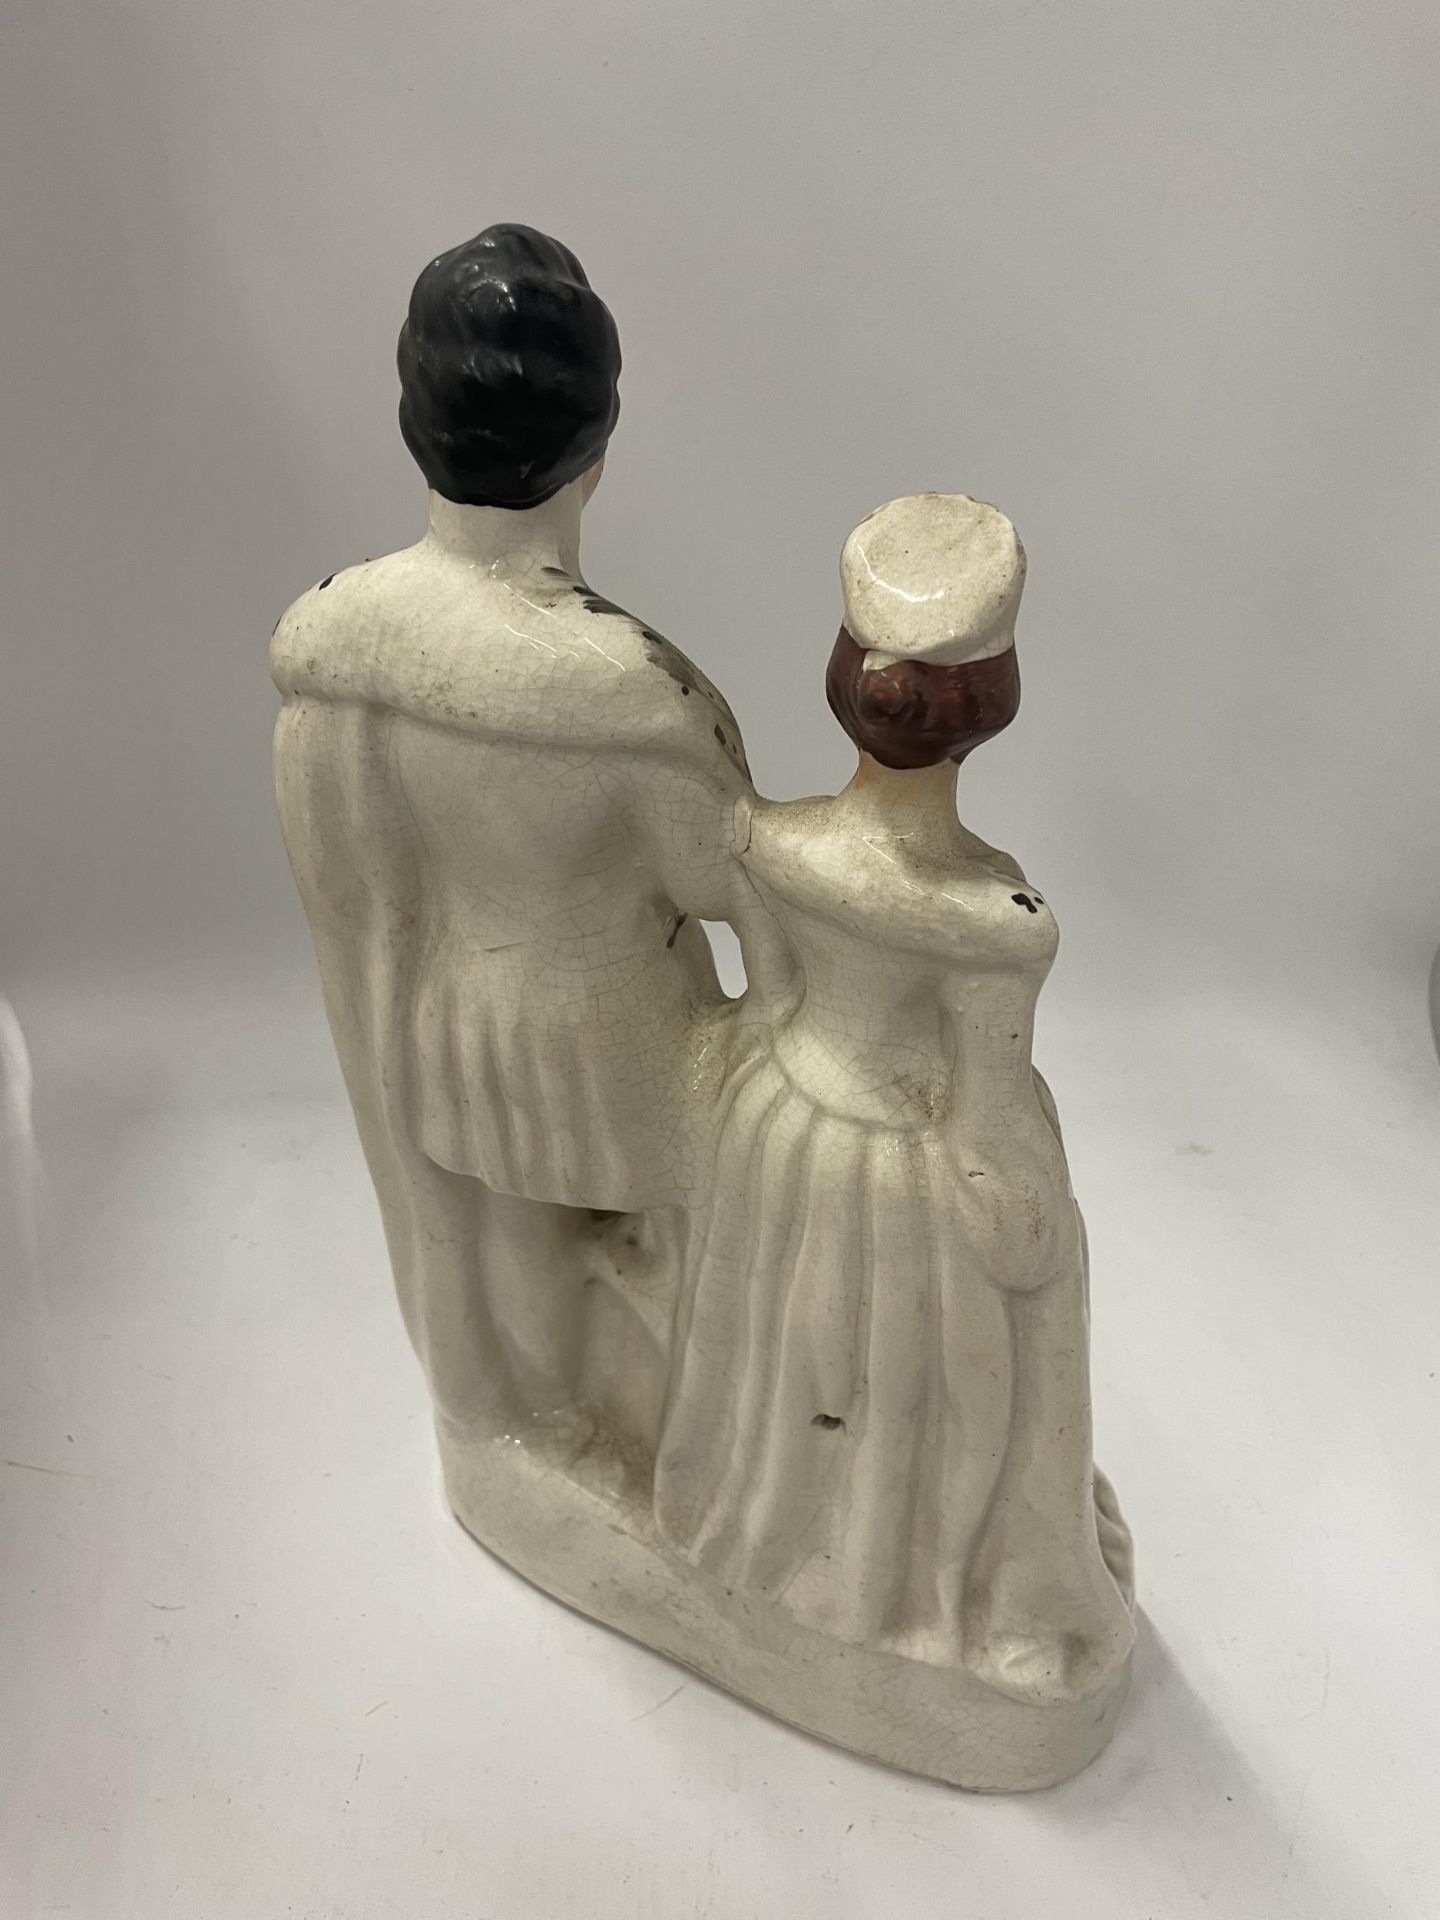 A STAFFORDSHIRE POTTERY FIGURE OF QUEEN VICTORIA AND VICTOR EMMANUEL II, QUEEN & KING OF SARDINIA - Image 3 of 5